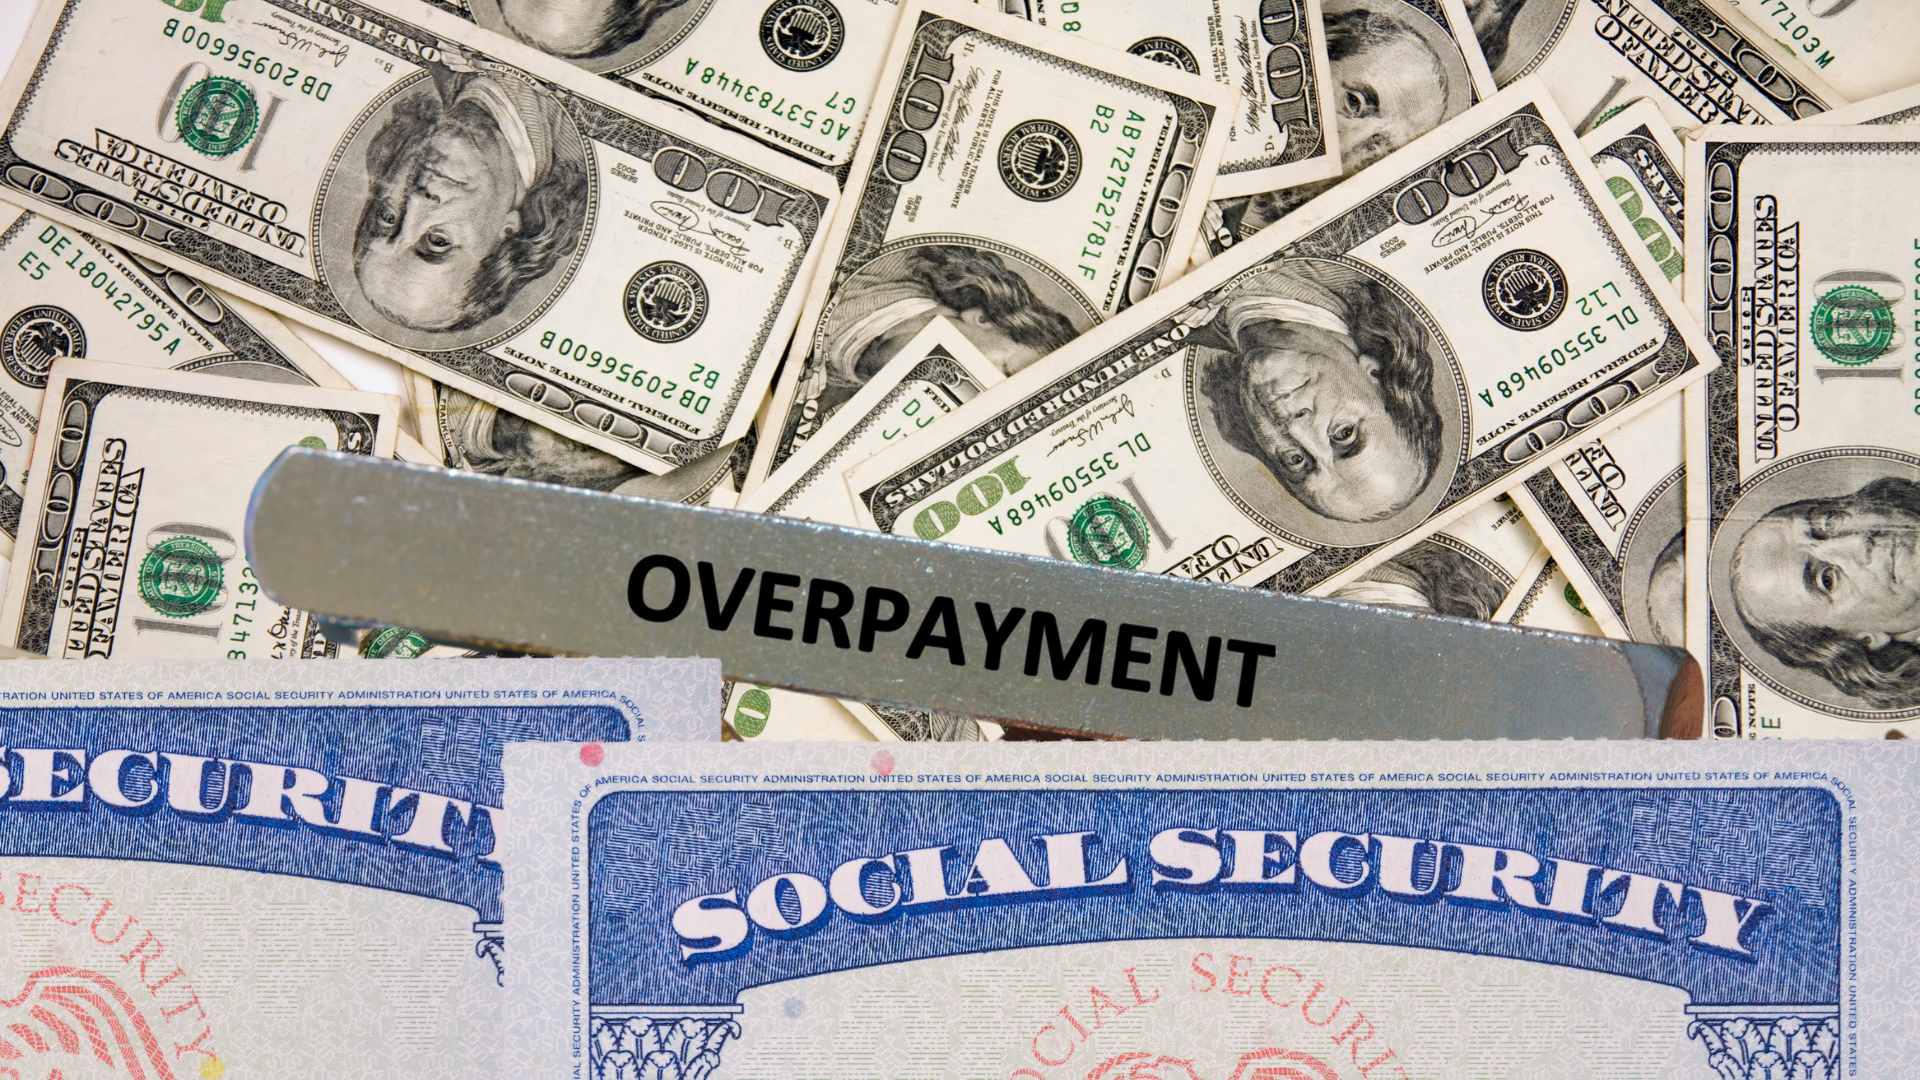 SSA cards, dollars and overpayment sign since millions of Americans have received overpayment notices regarding their SSDI, SSI or retirement checks